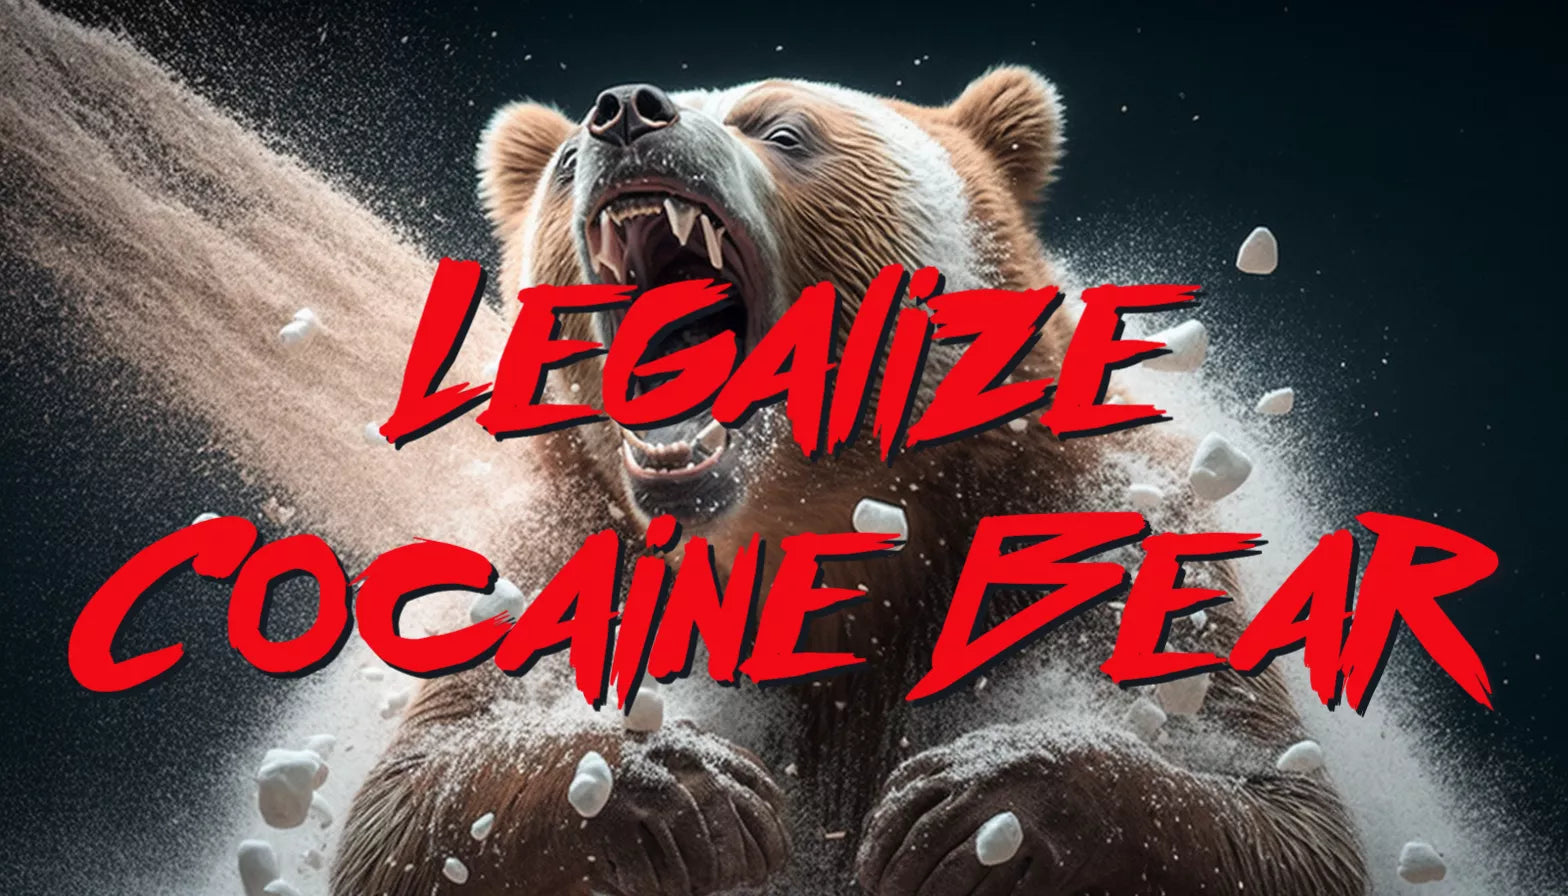 From Cocaine Bear to Drunk Elk: A Look at Animals on Drugs and the Case for Legalization